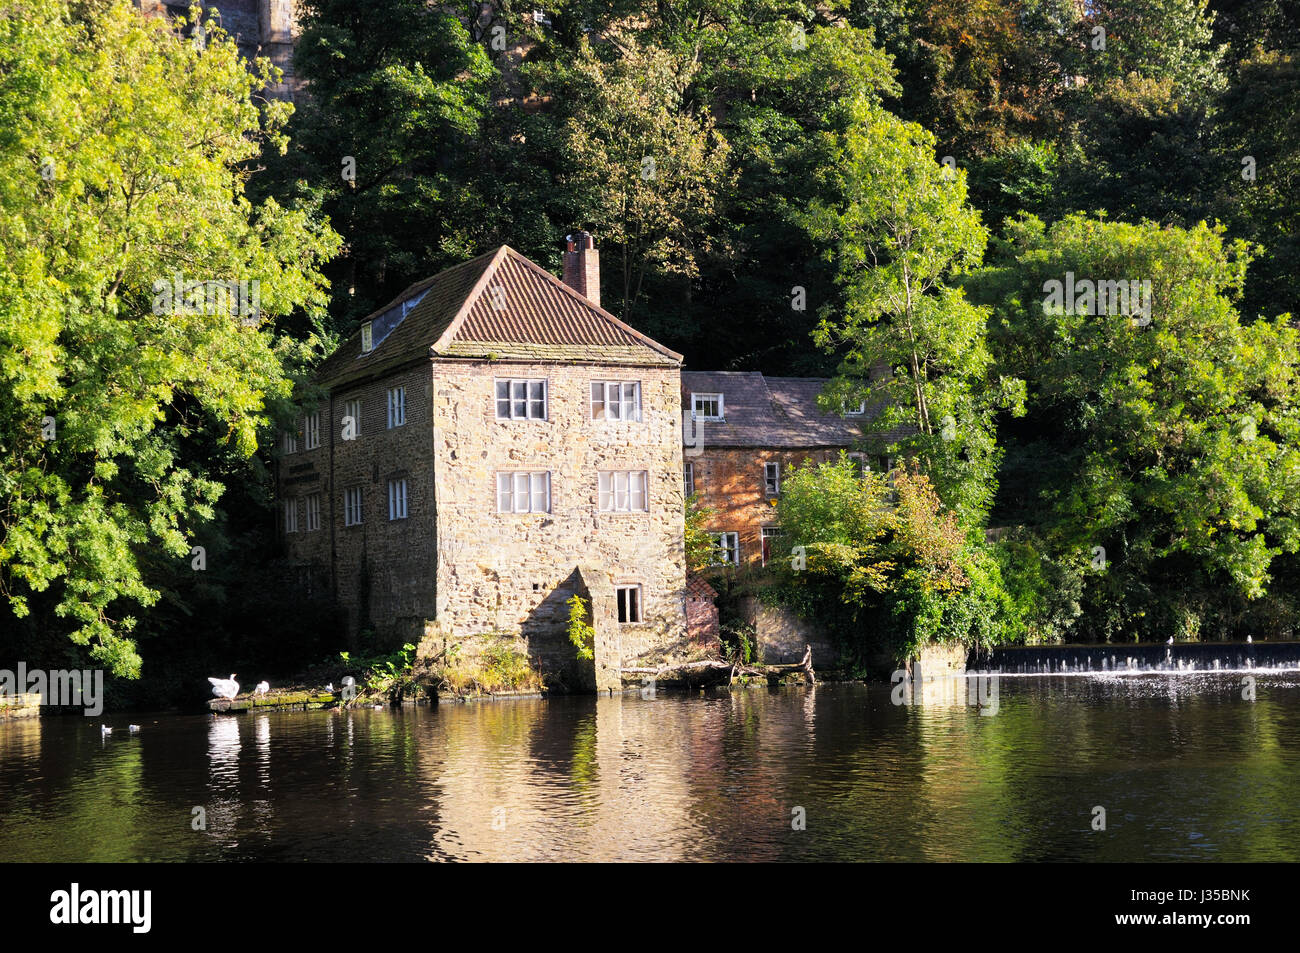 The Old Fulling Mill on the banks of the River Wear, Durham City, North of England, UK Stock Photo